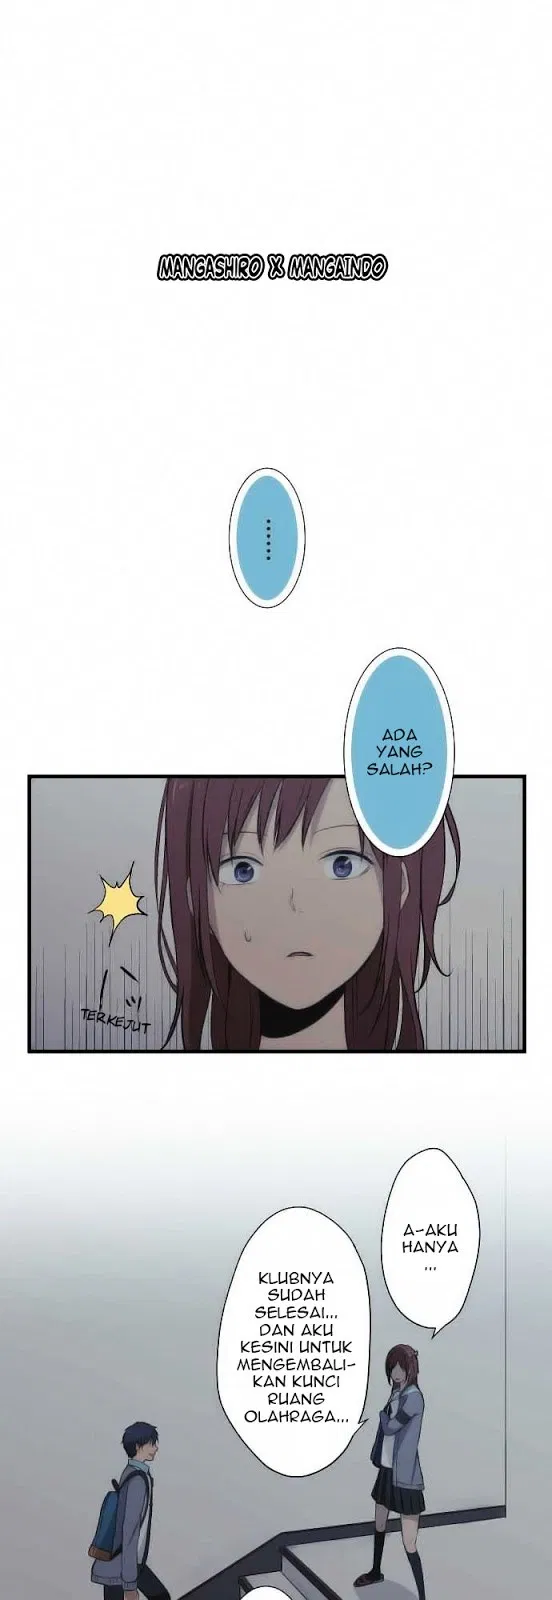 ReLIFE Chapter 37